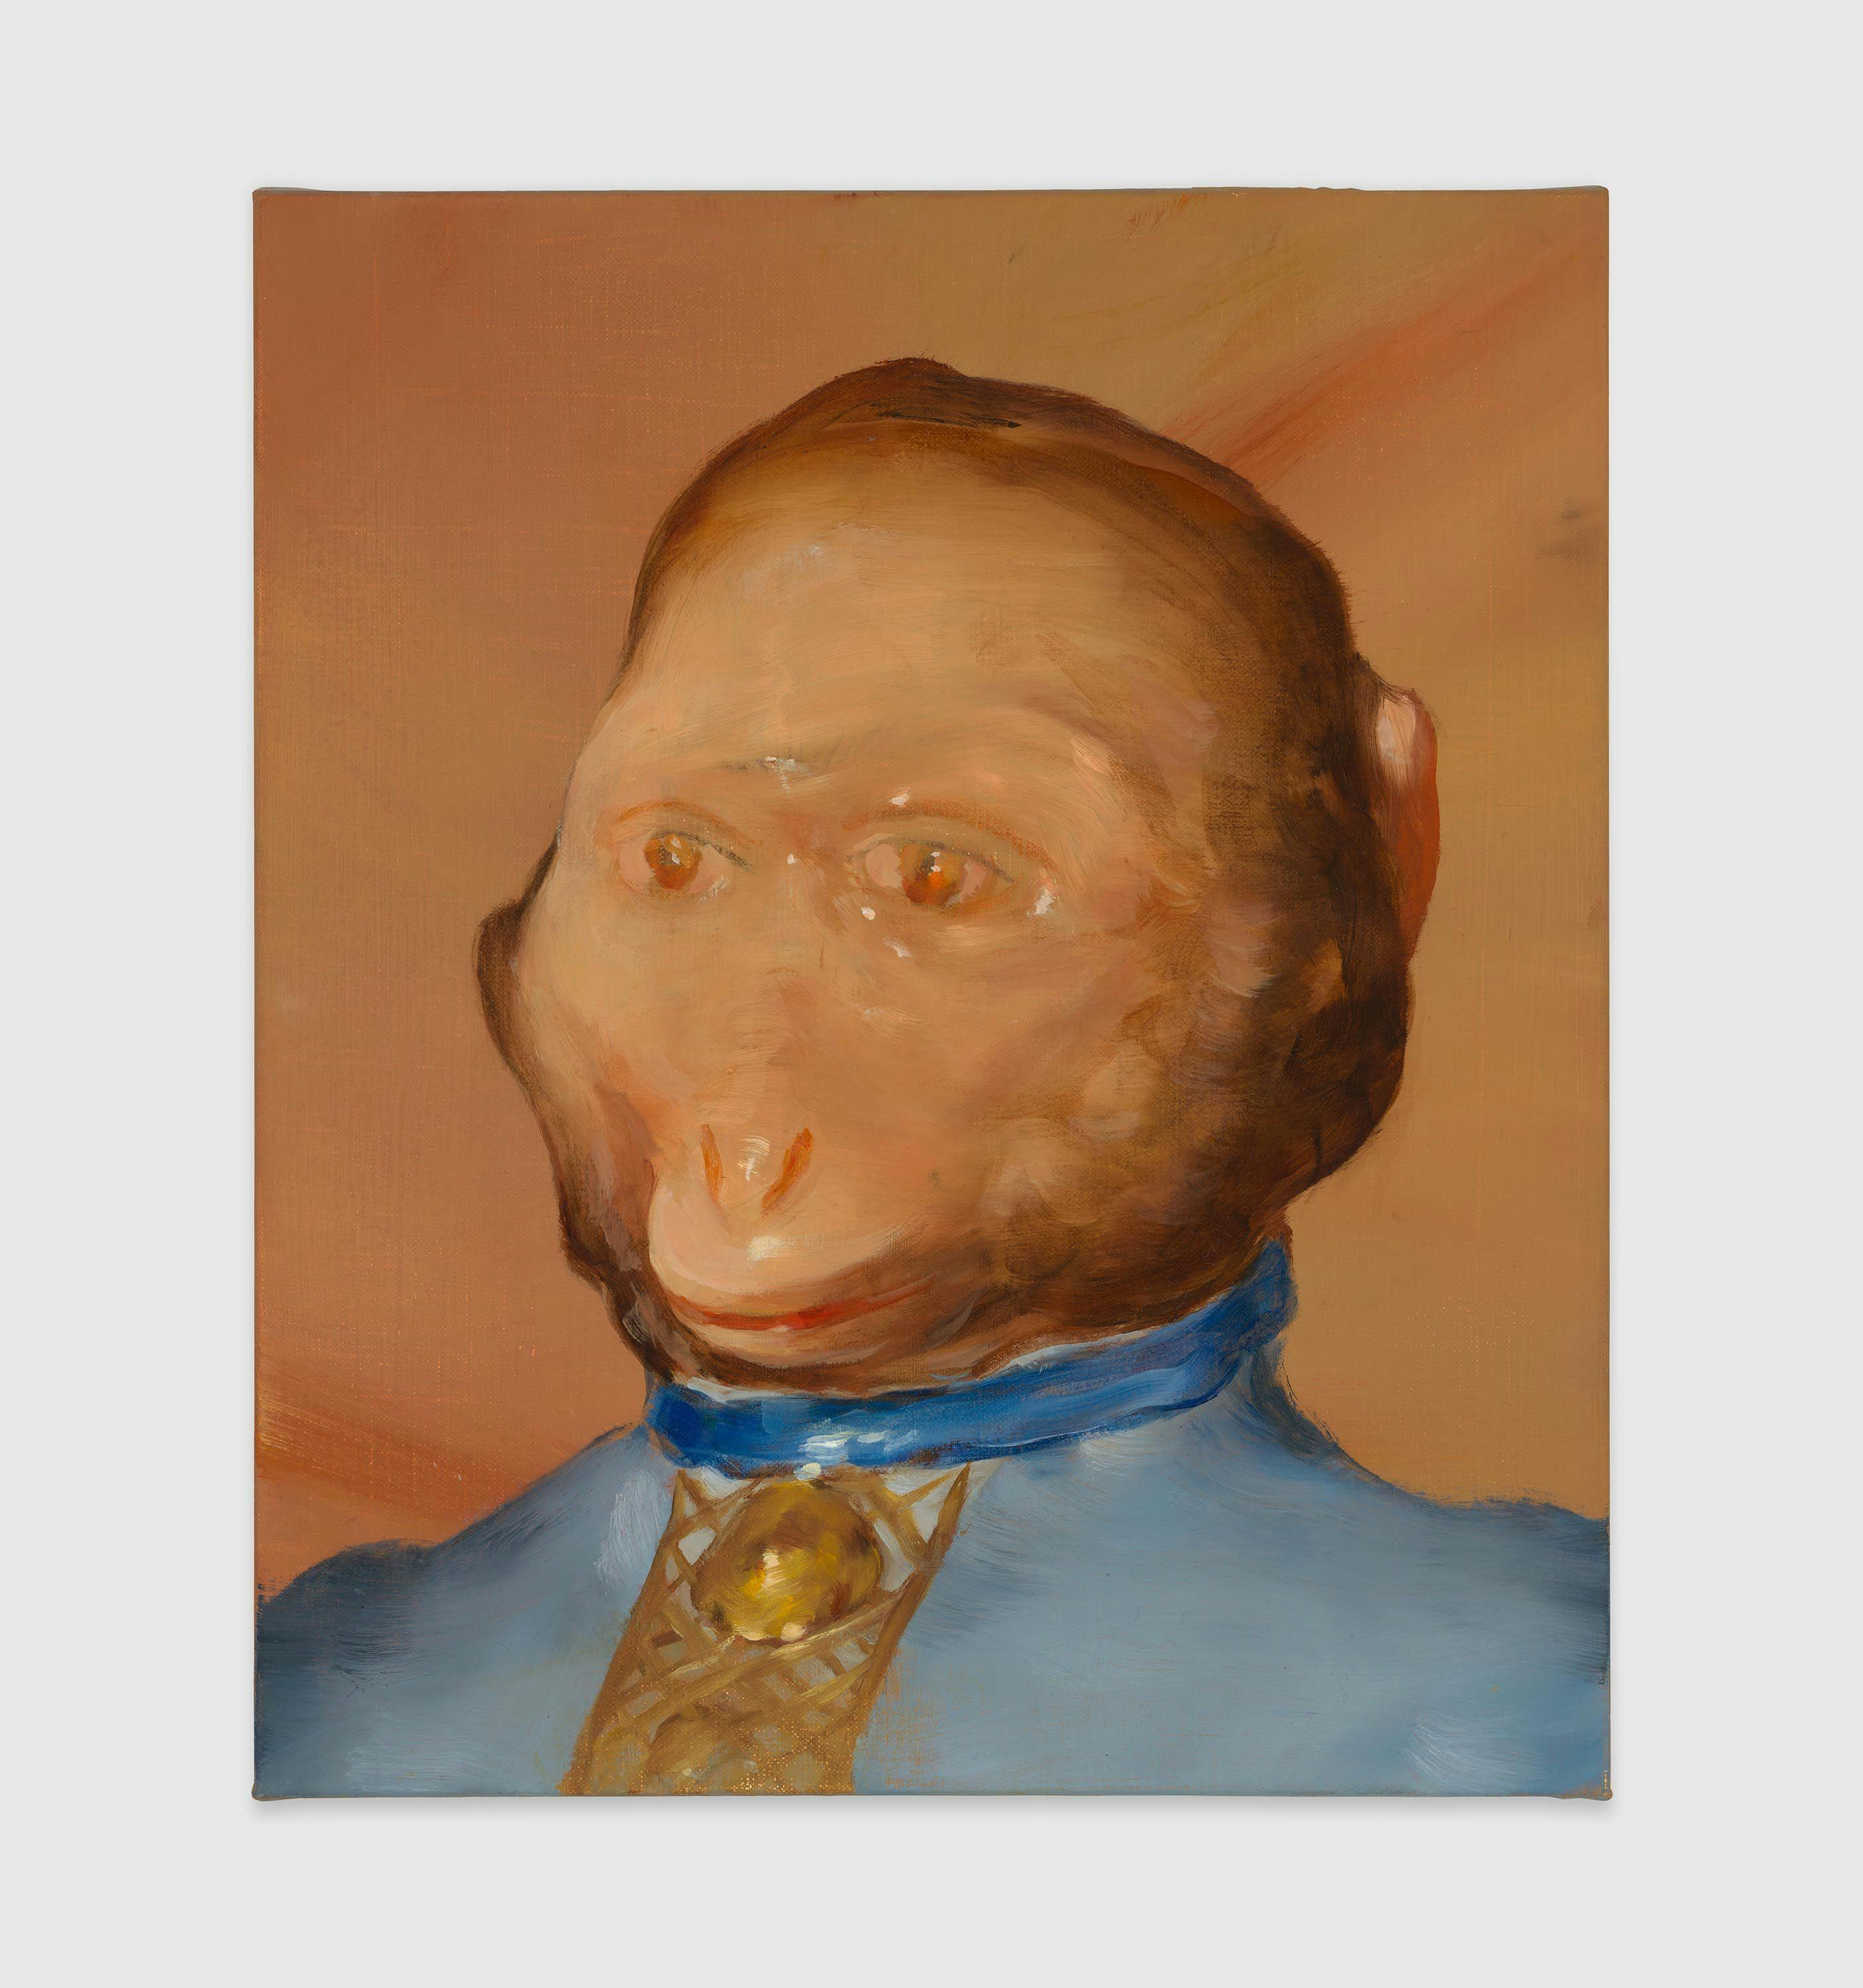 A painting by Michaël Borremans, titled The Monkey III, dated 2023.